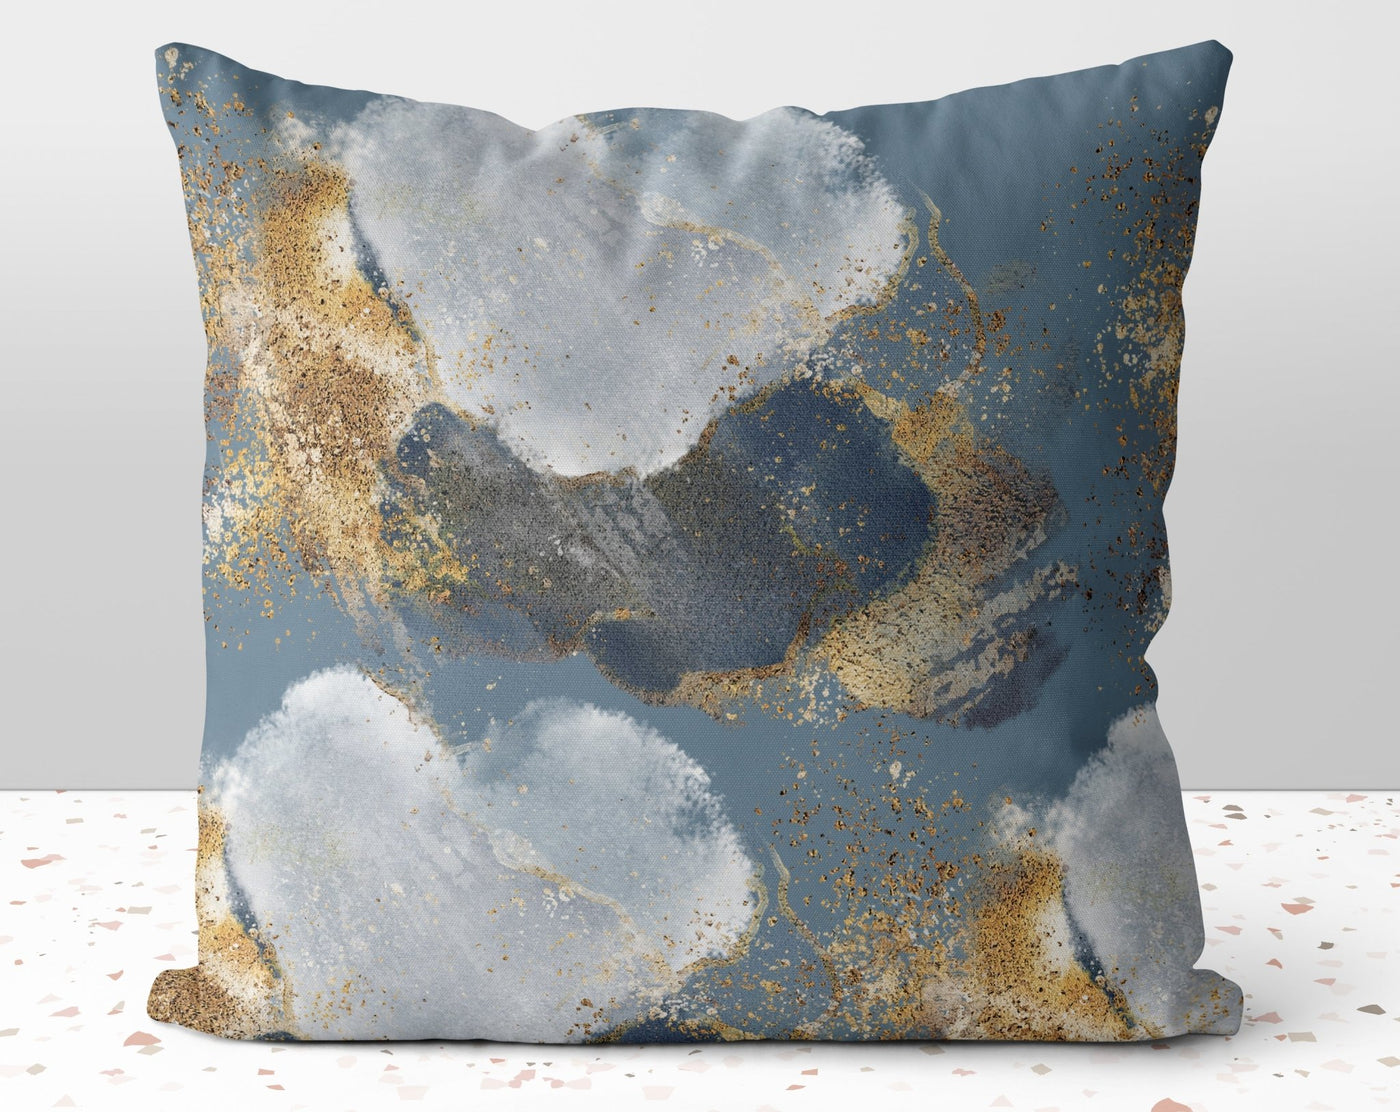 Glam + Chic Gray with Gold Printed Accents Pillow Throw Cover with Insert - Cush Potato Pillows